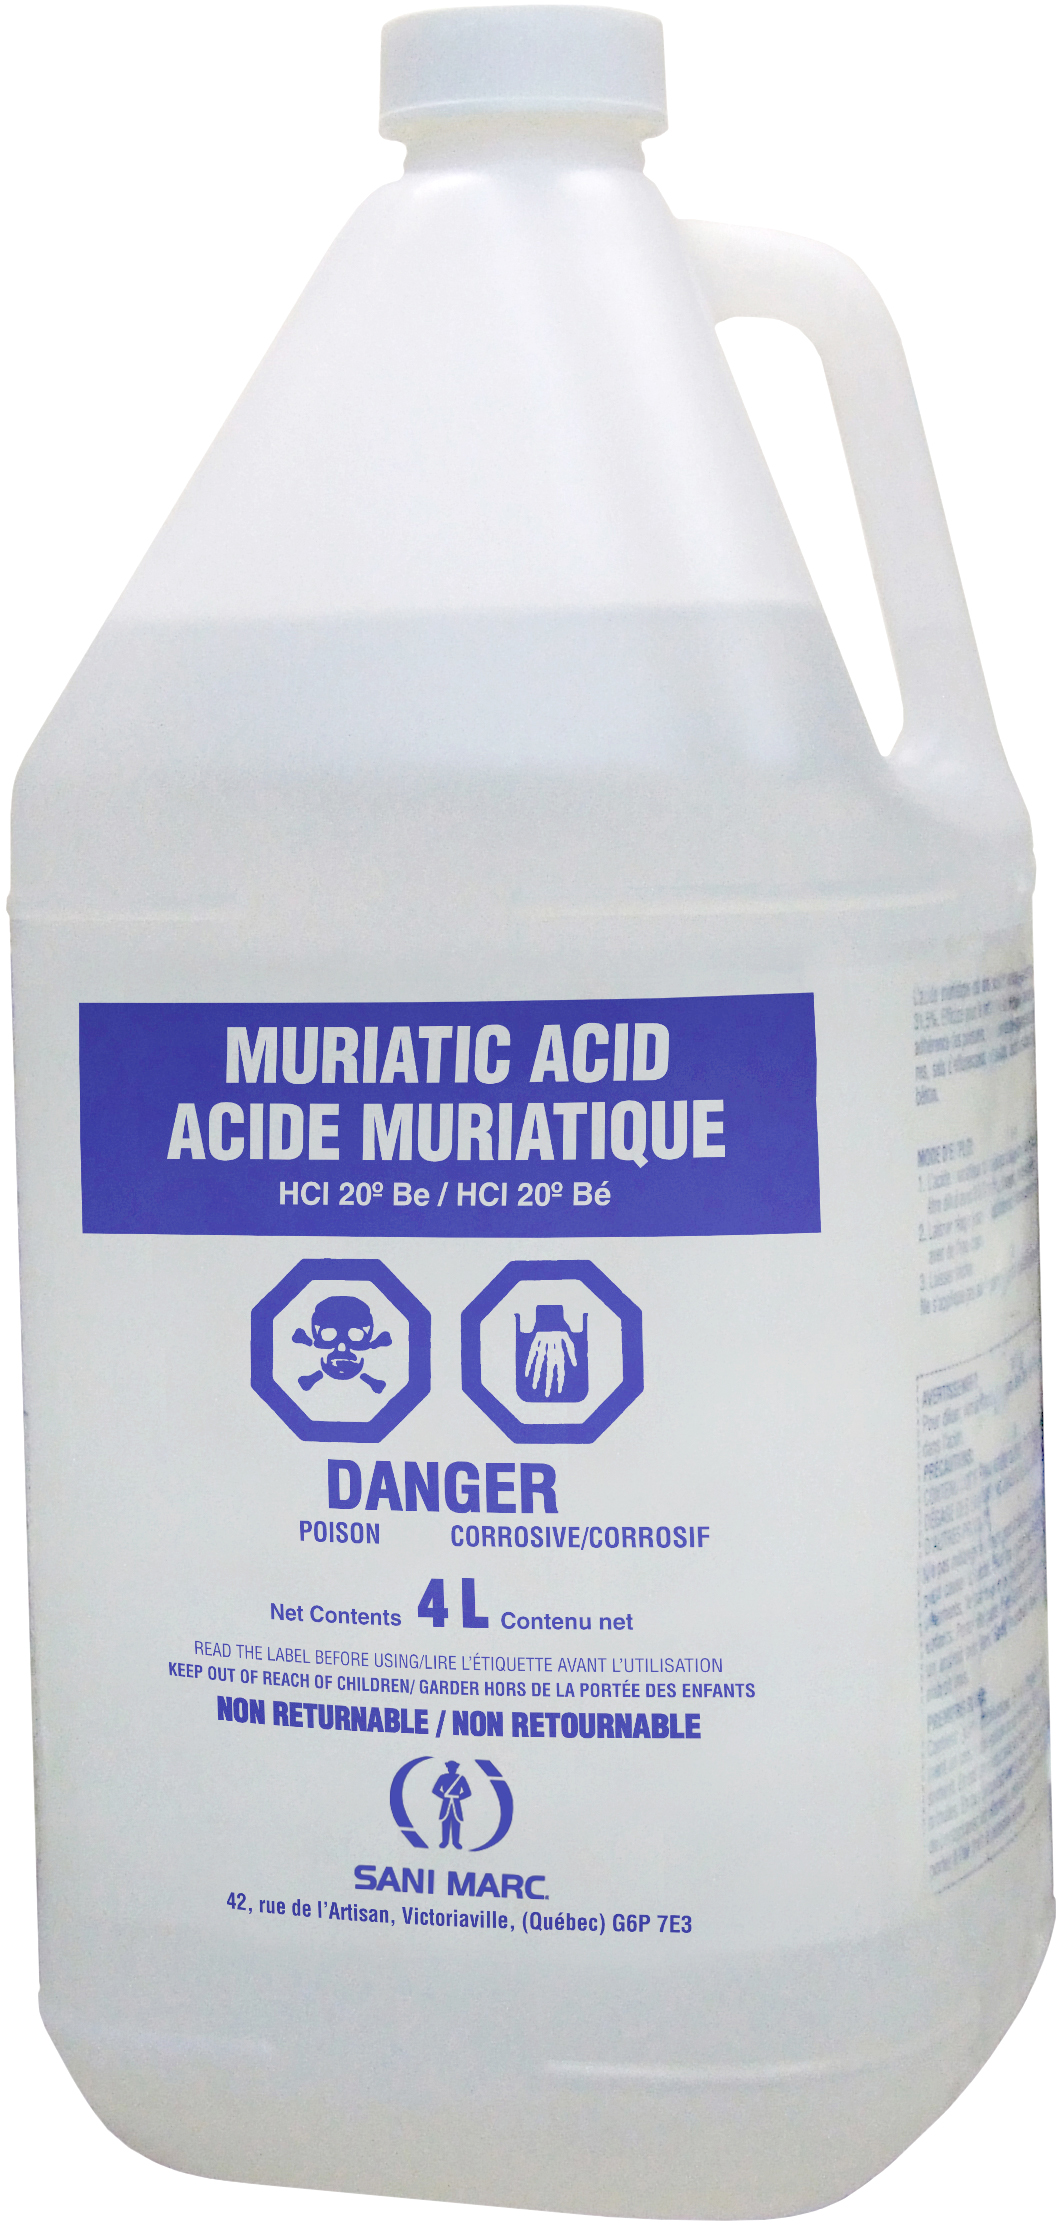 Klean Surface Muriatic Acid concrete and stone cleaner